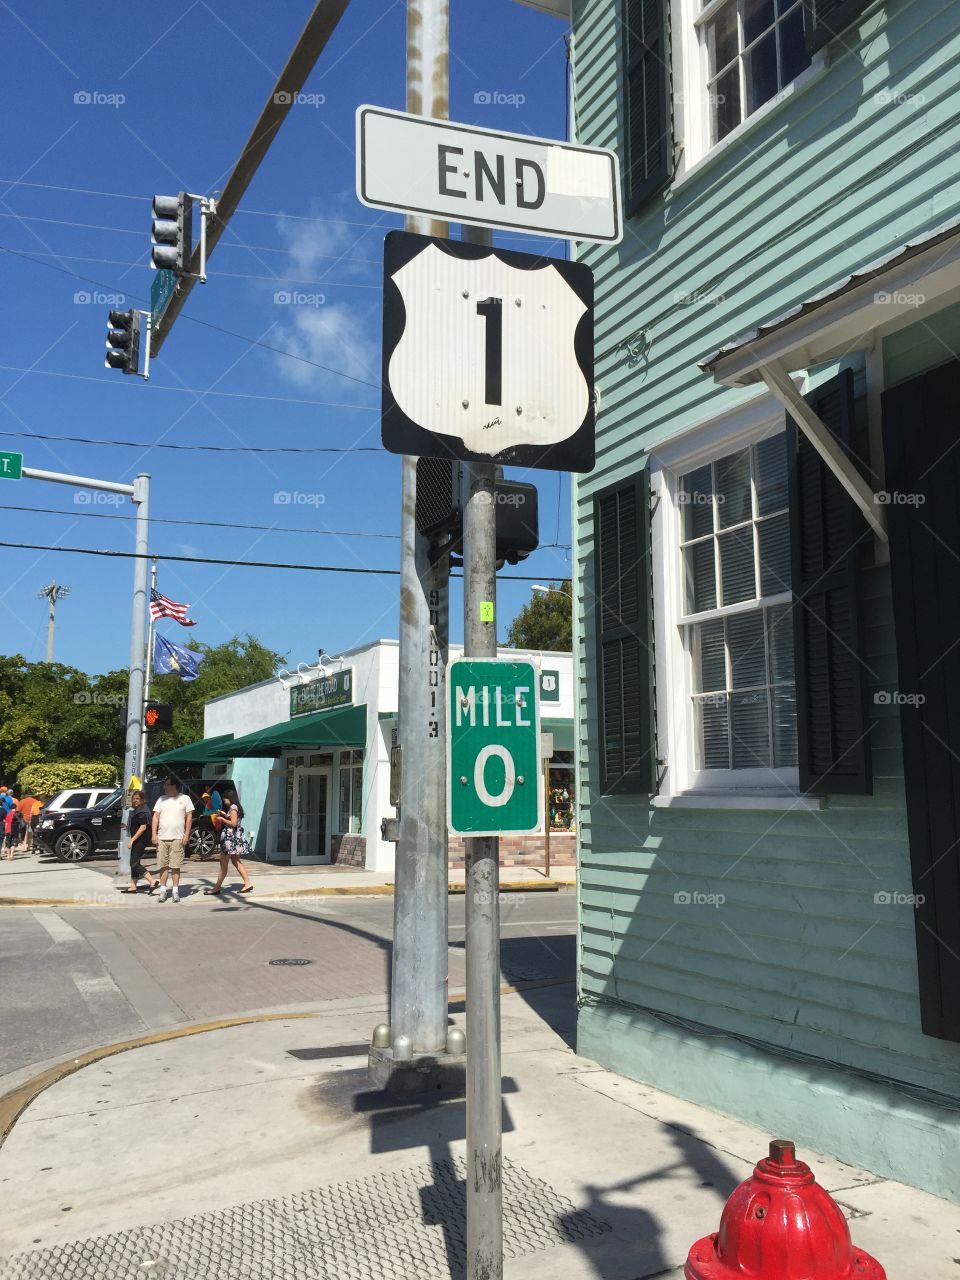 mile 0. In Key West at the end of the road....